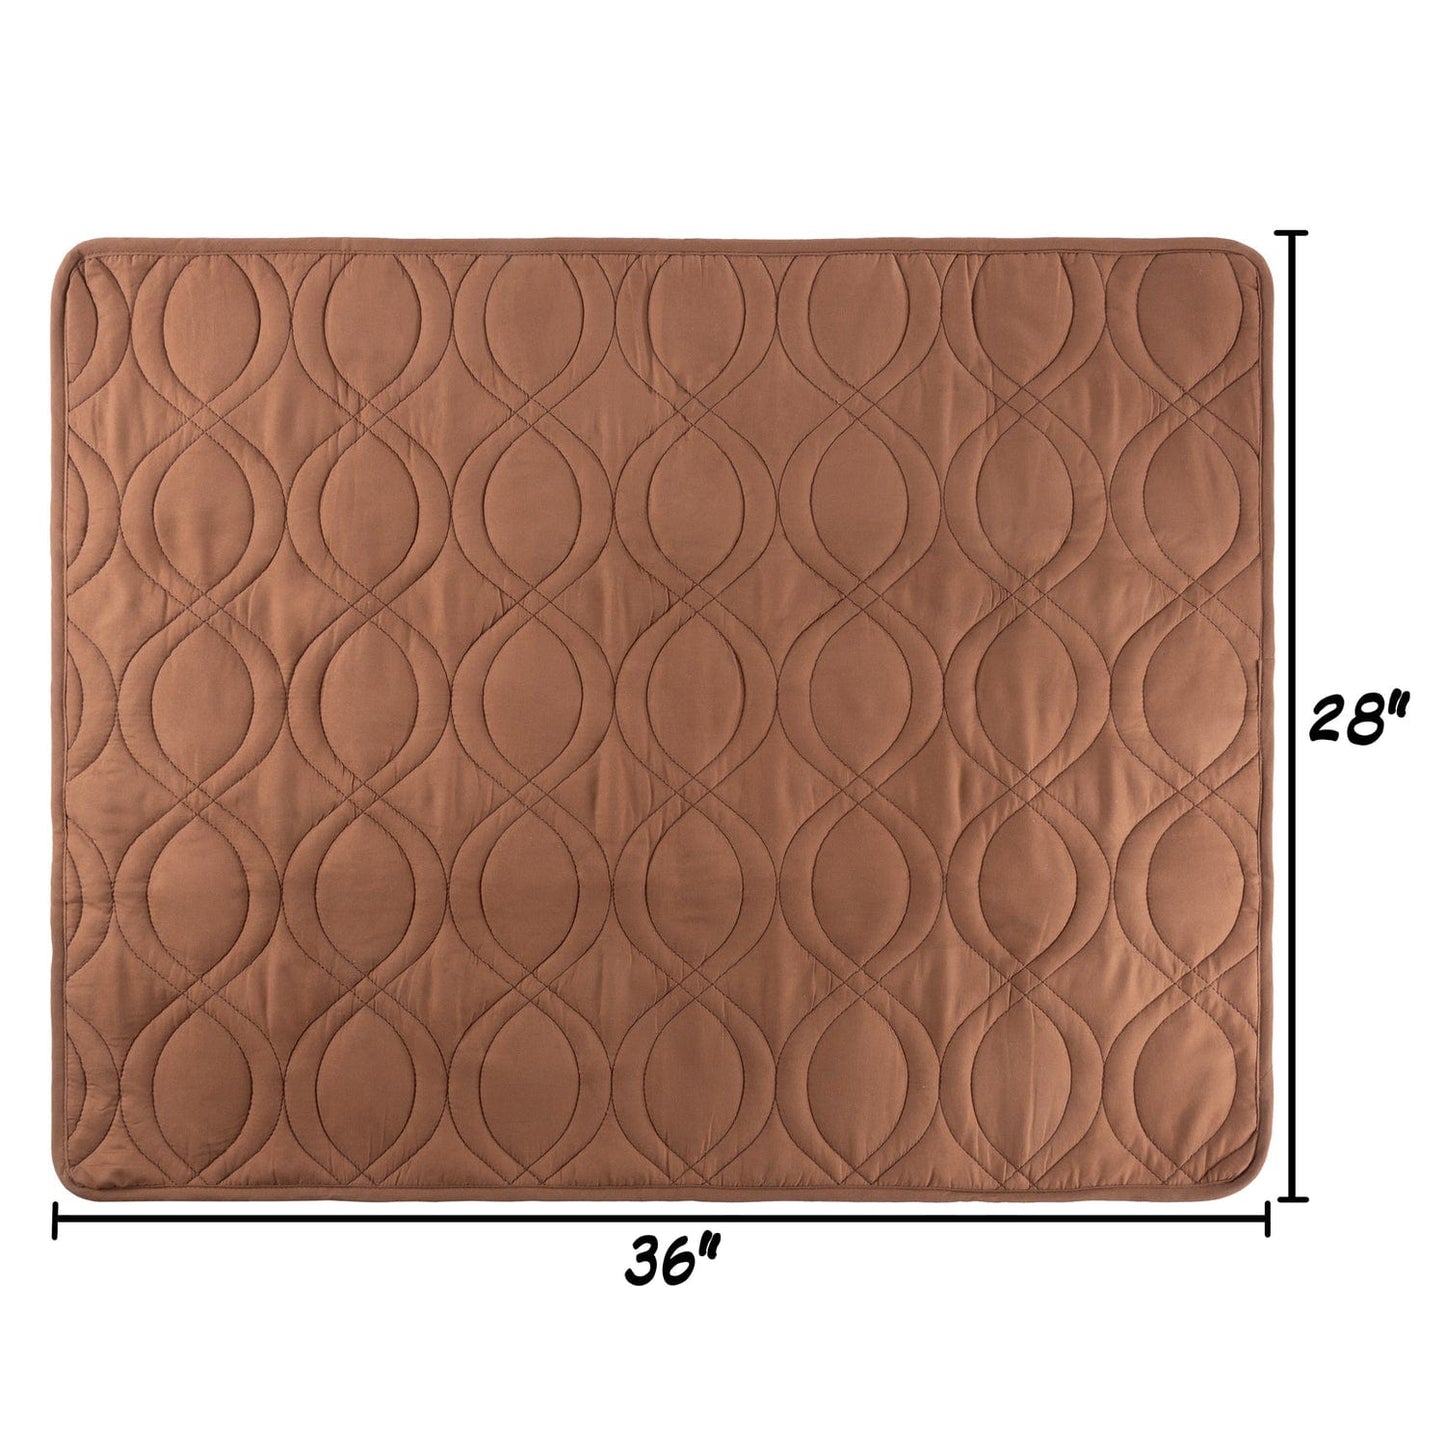 100% Waterproof Pet Mat - 36X28 Partial Couch Covers for Dogs, Cats, or Kids – Quilted Non-Slip Furniture Protector Pad by PETMAKER (Brown)